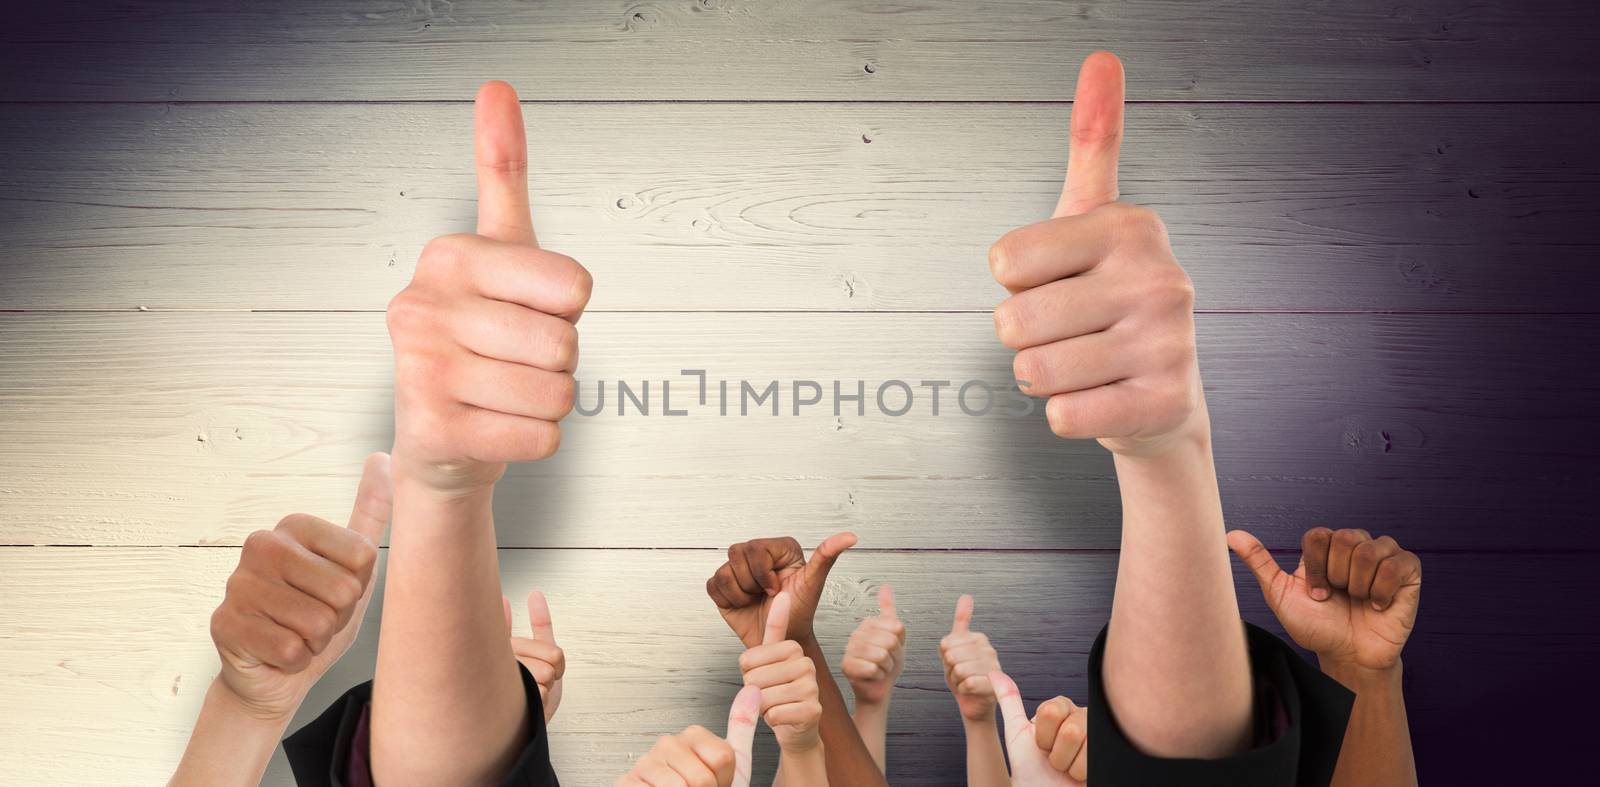 Hands showing thumbs up against shadow on wooden boards